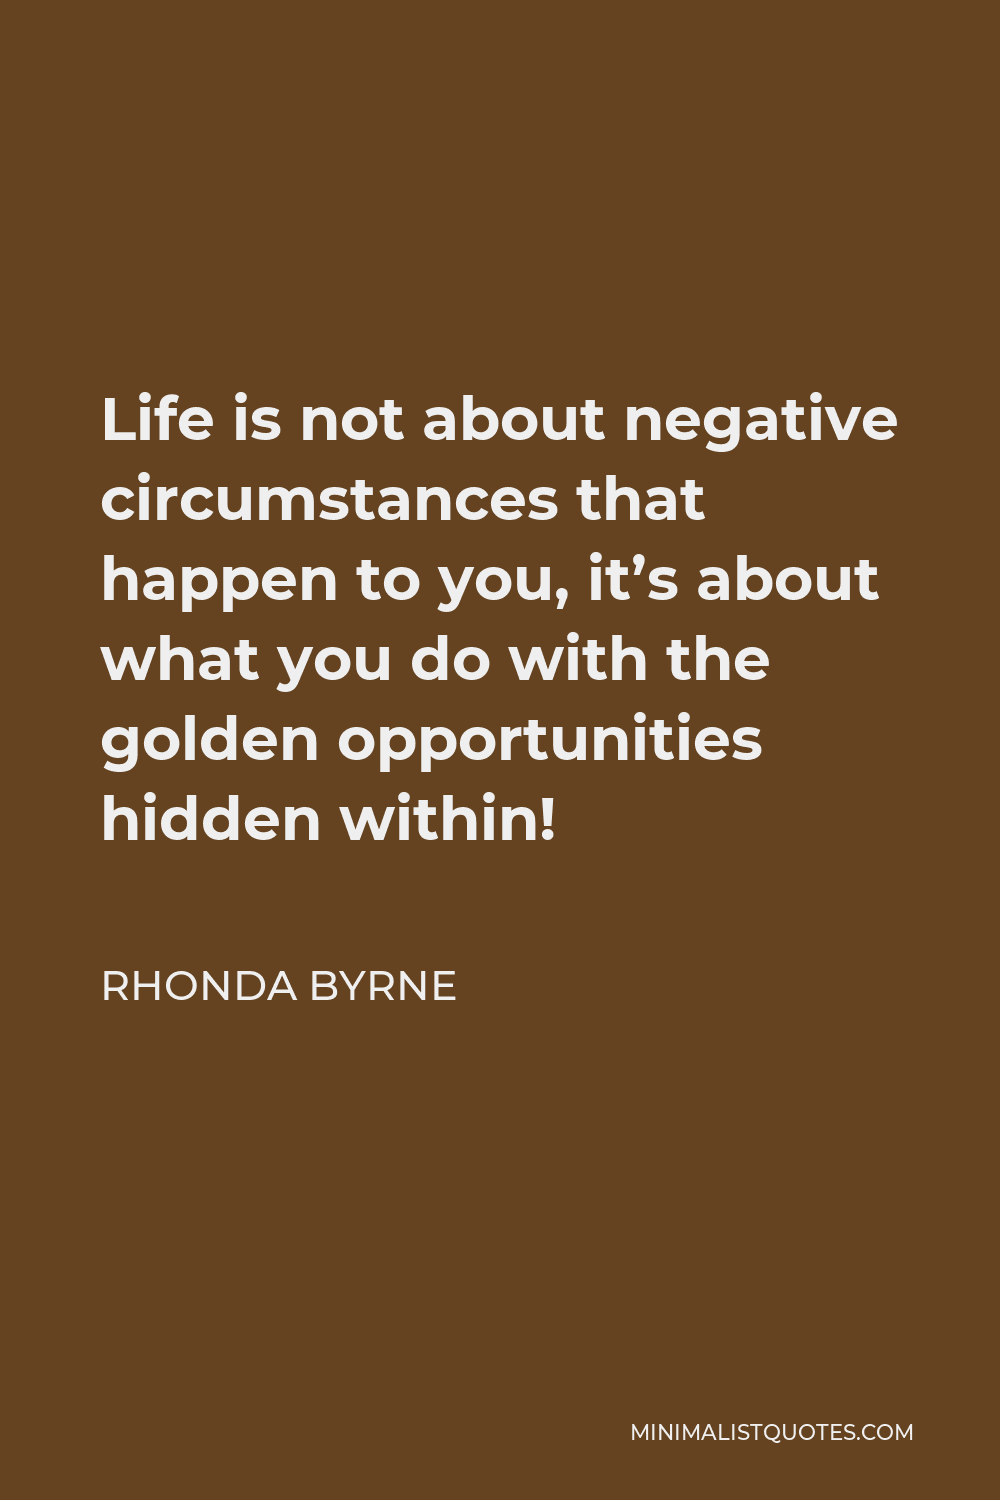 Rhonda Byrne Quote - Life is not about negative circumstances that happen to you, it’s about what you do with the golden opportunities hidden within!